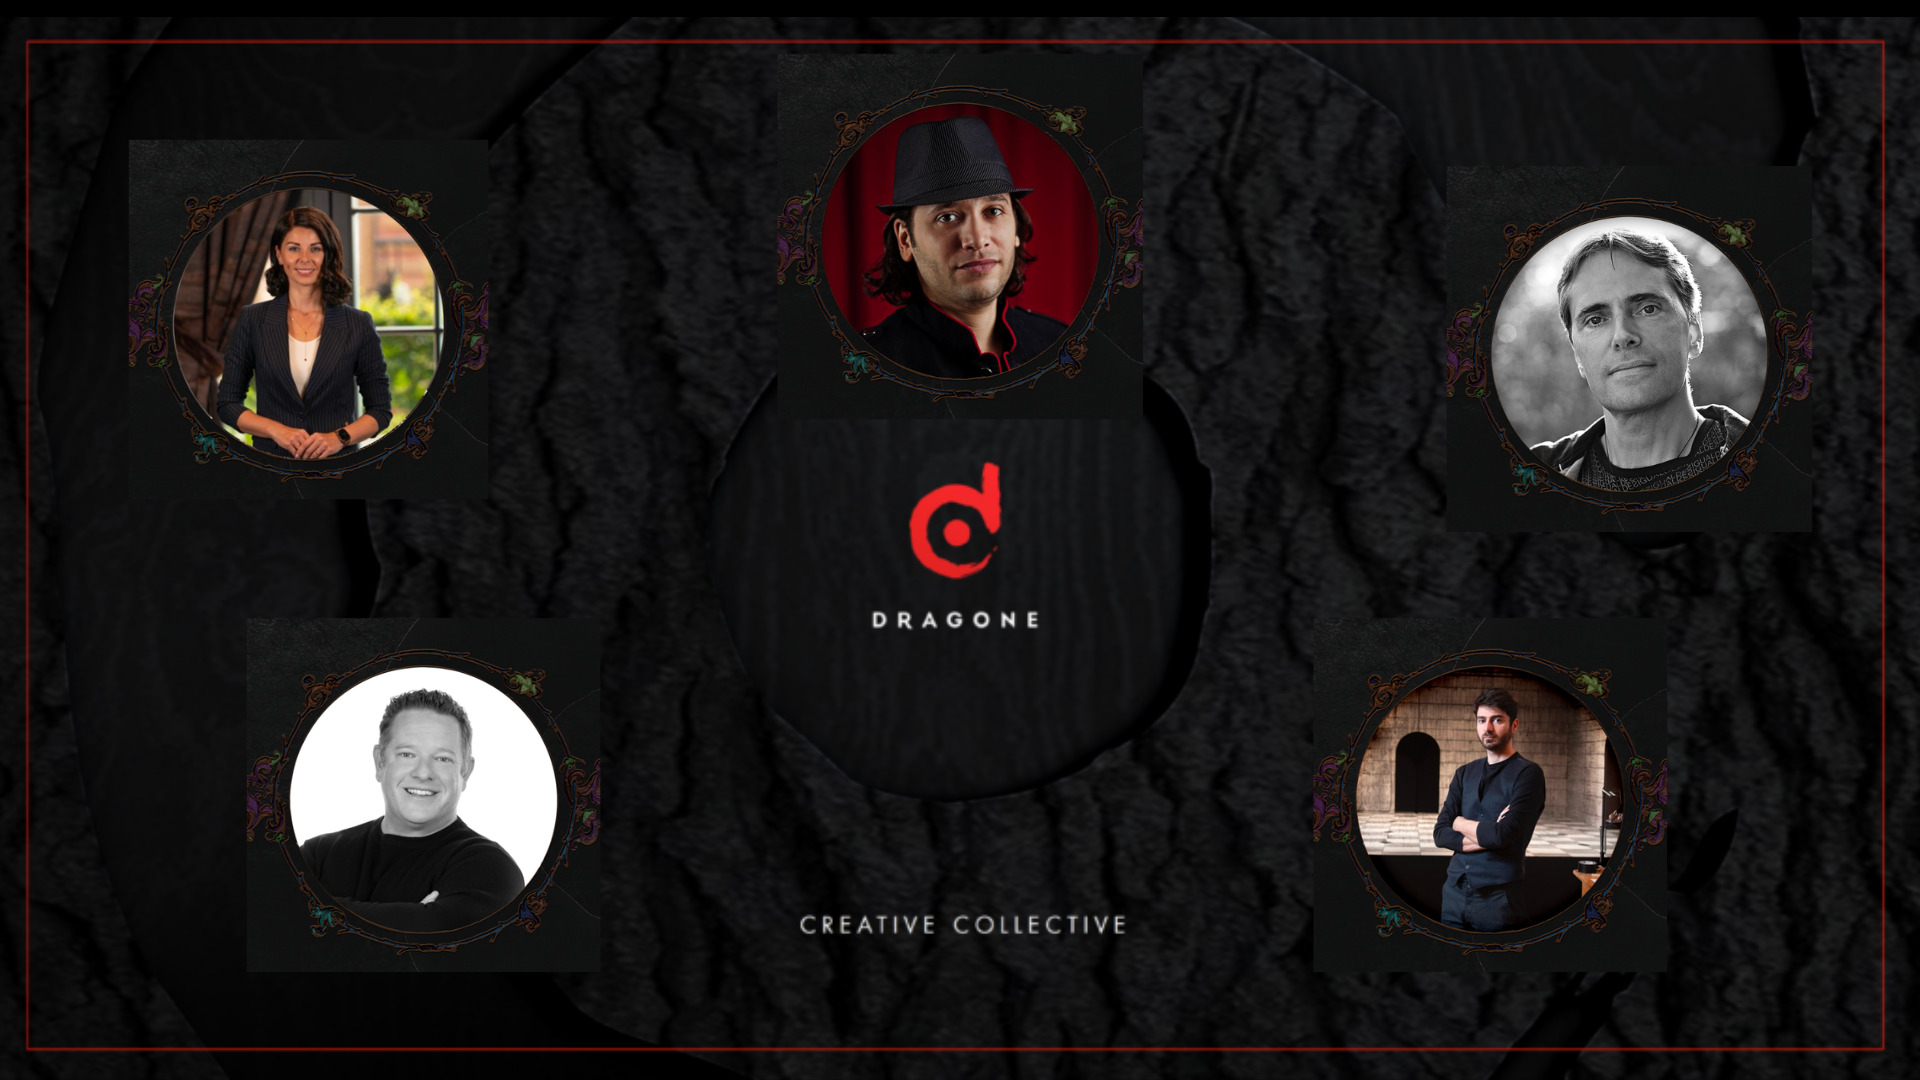 Dragone Creative Collective Members Announced